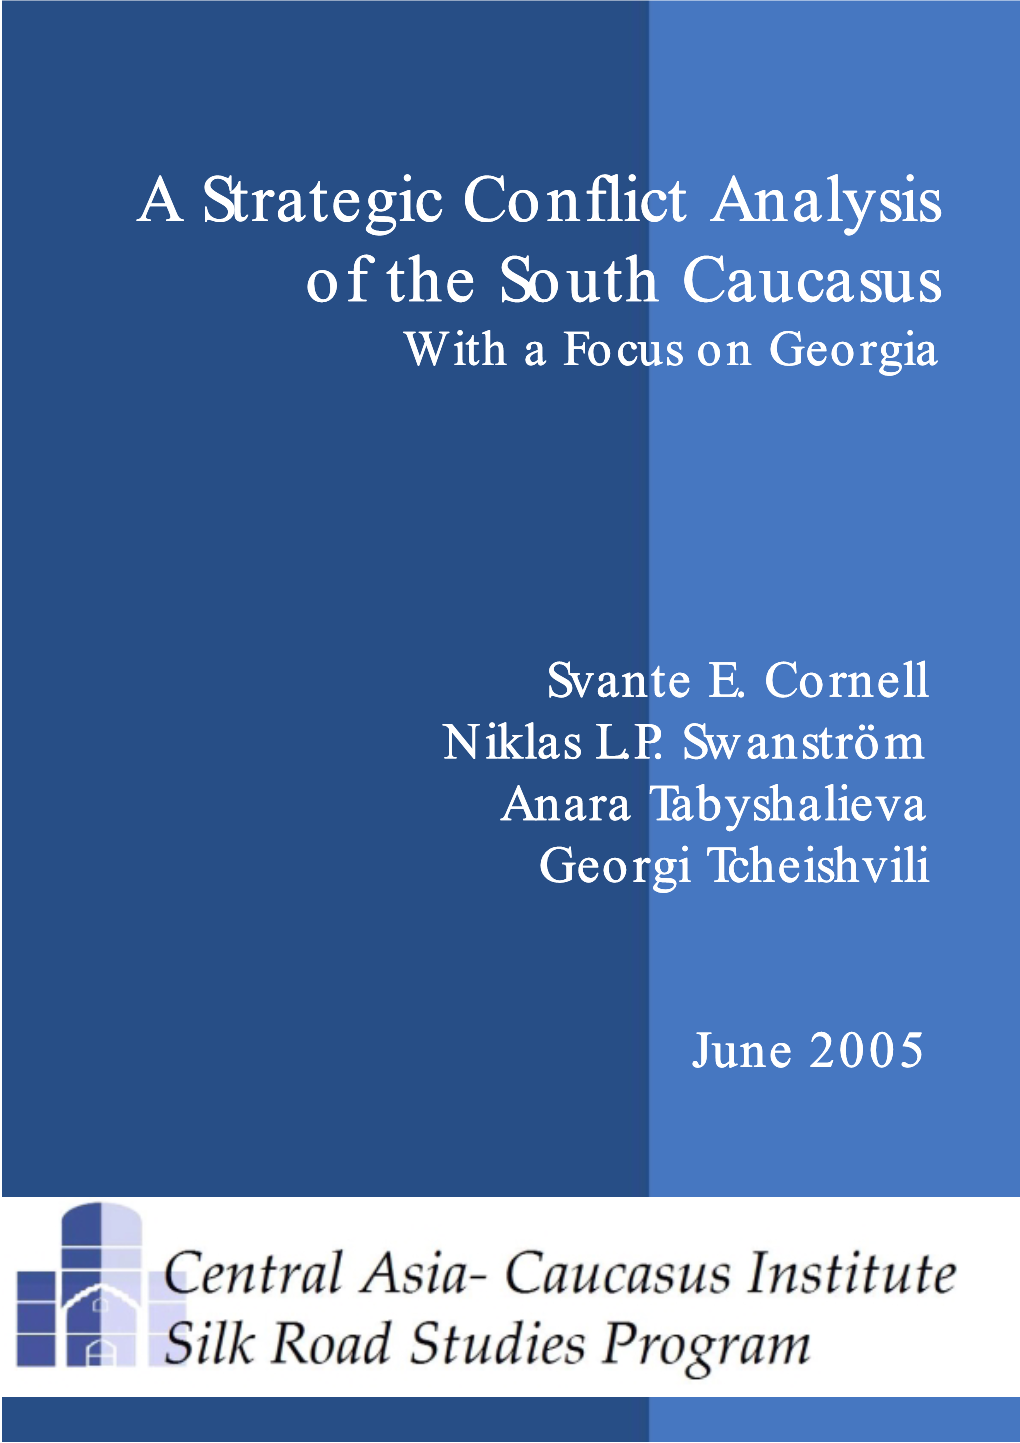 A Strategic Conflict Analysis of the South Caucasus with a Focus on Georgia